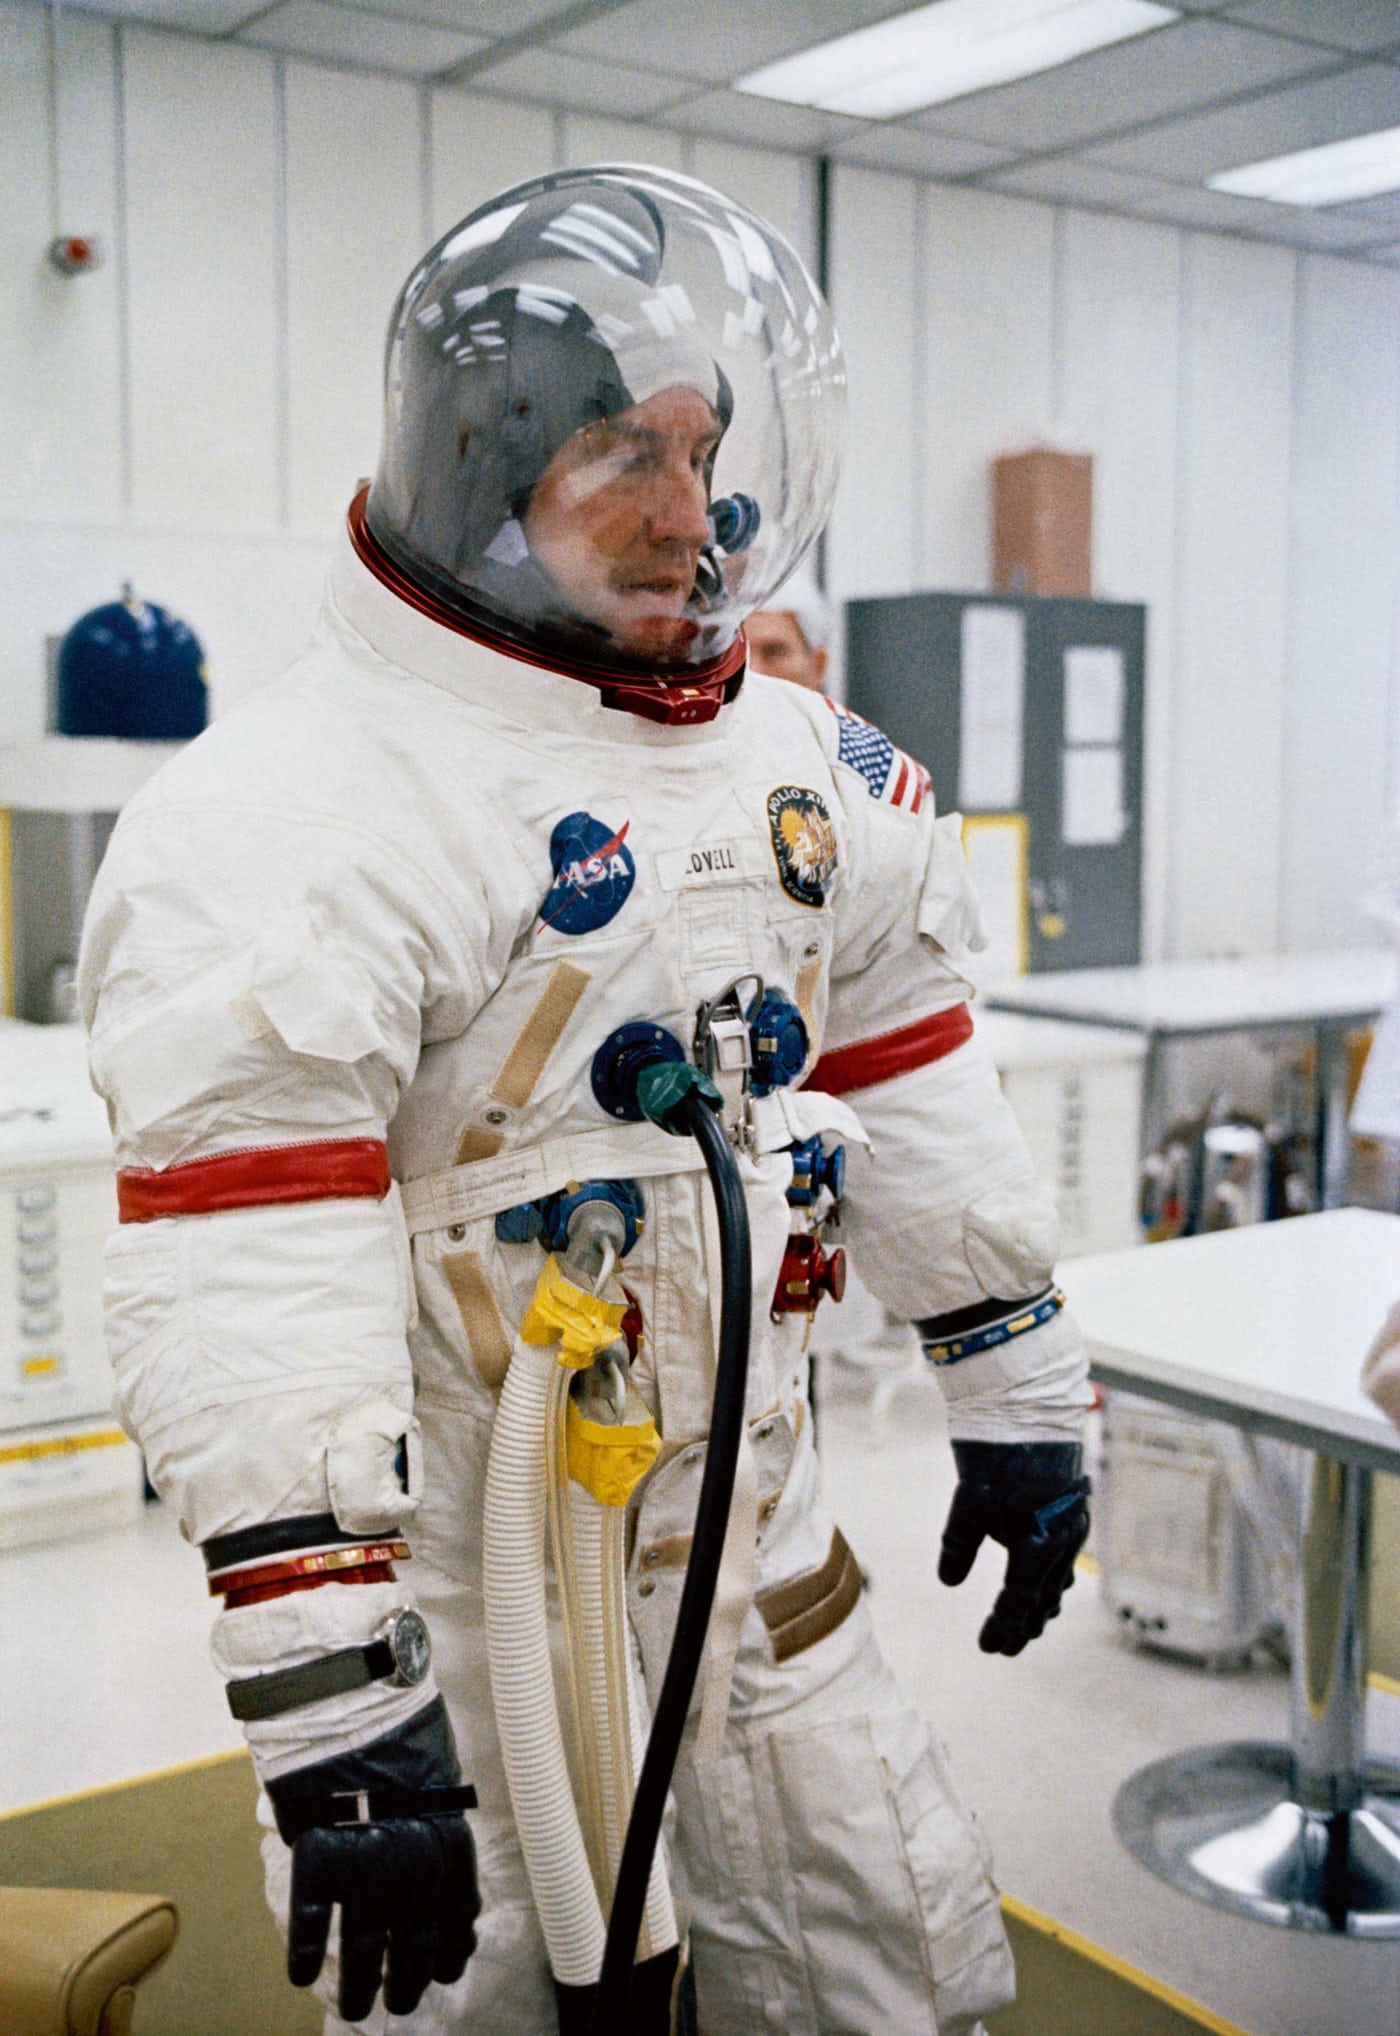 Jim Lovell, Apollo 13 Mission Commander, preparing for the launch, his Omega Speedmaster strapped around his flying suit.